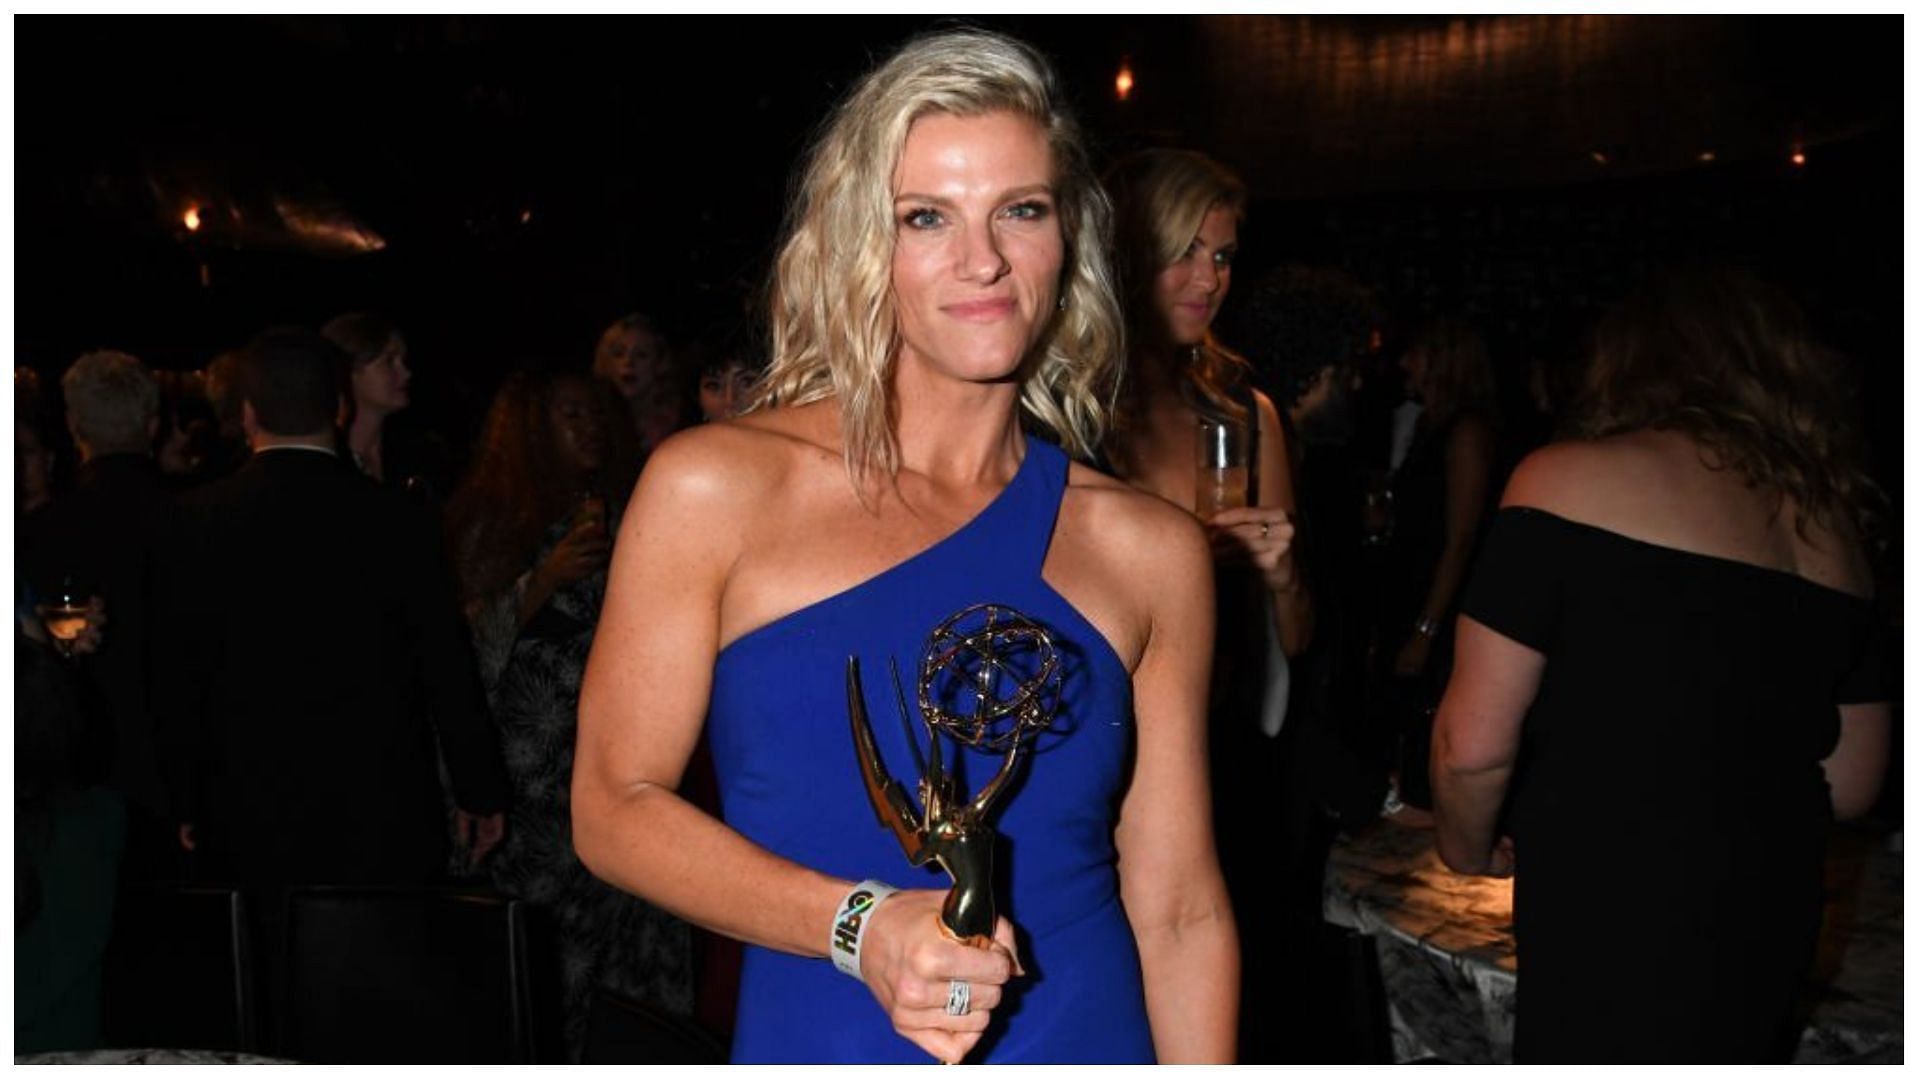 Lindsay Shookus has left SNL as a producer after 20 years (Image via Jeff Kravitz/Getty Images)